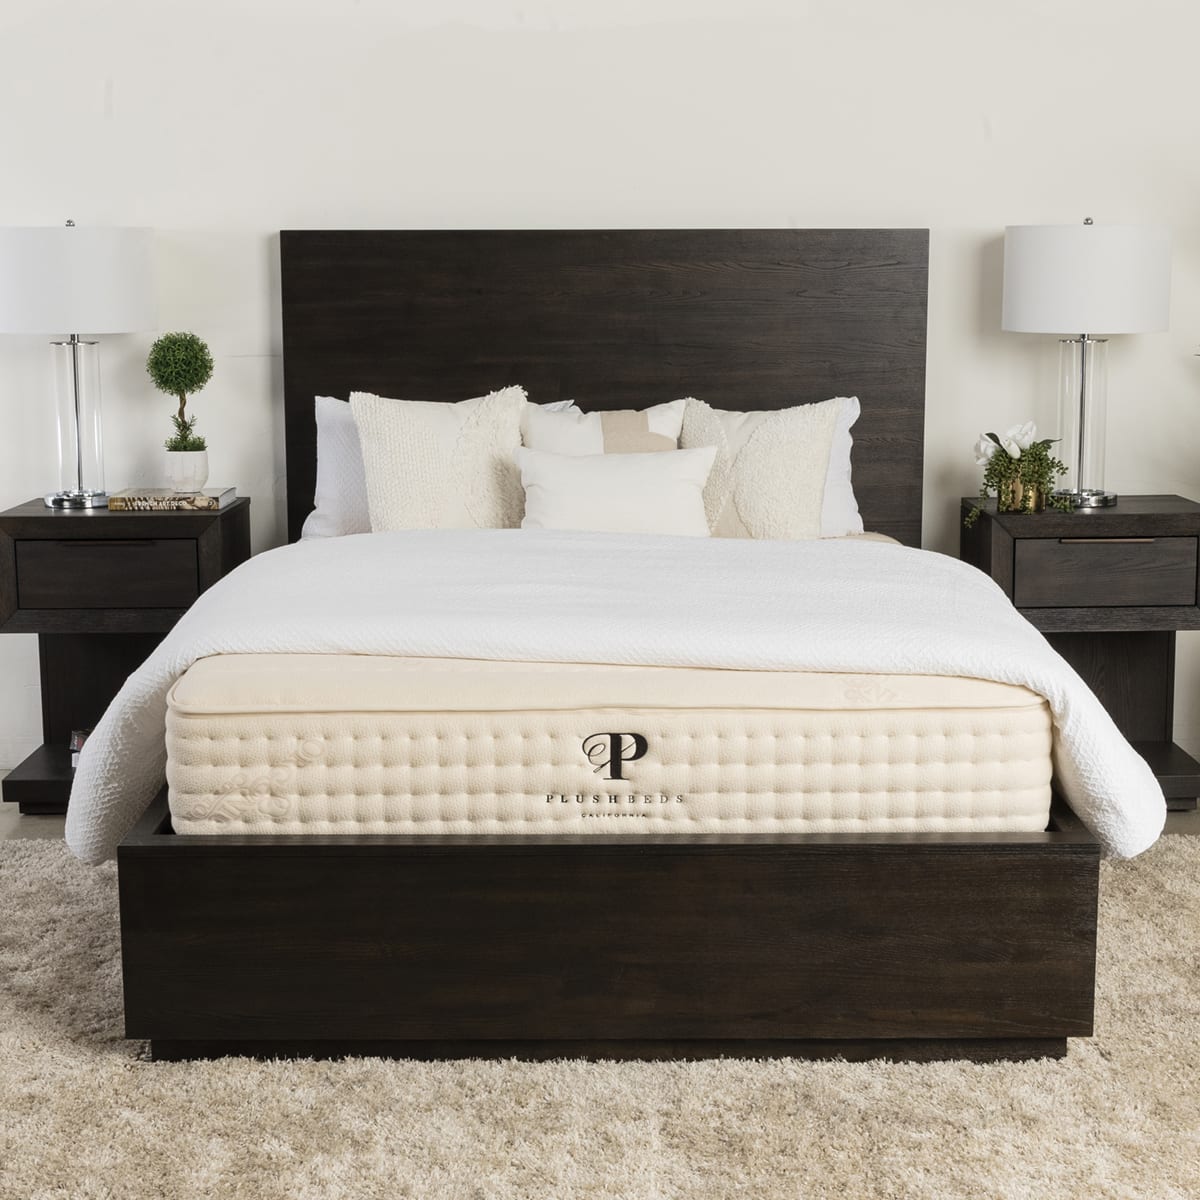 Show Tempur-pedic Beds From 2010